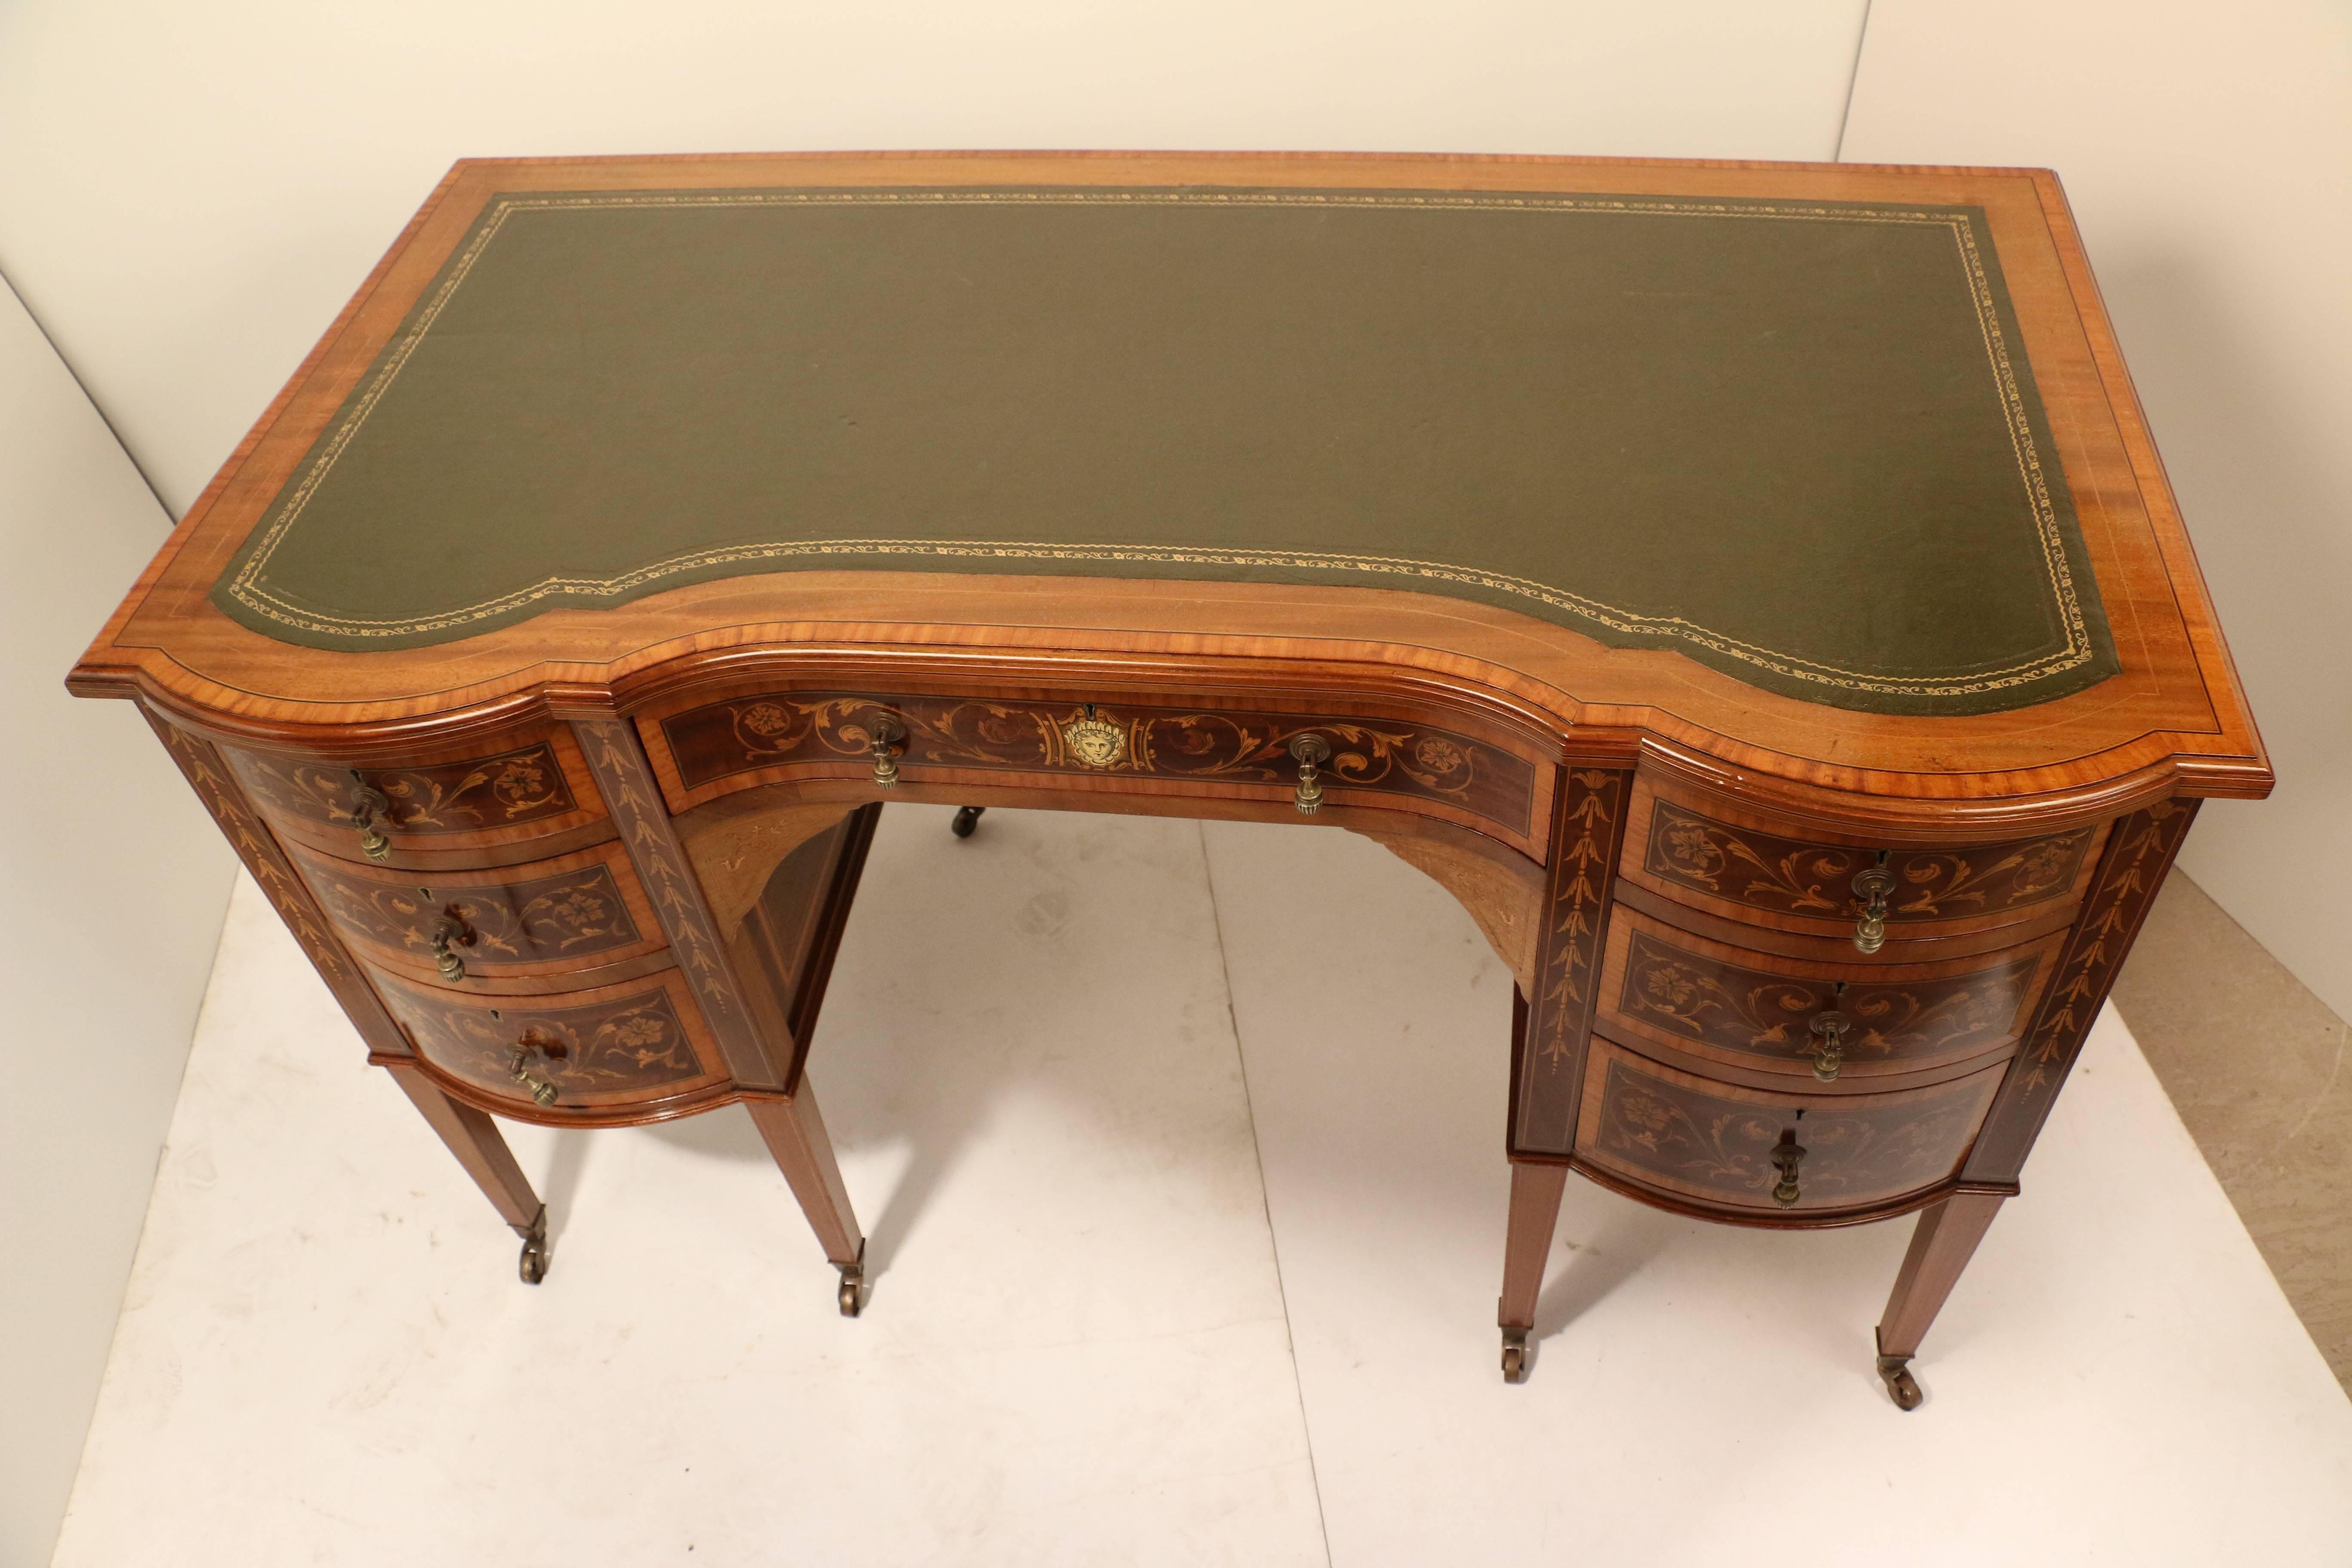 A fine Edwards and Roberts mahogany and marquetry kneehole desk, the shaped central drawer flanked by bow-fronted tiers of three drawers, profusely inlaid in satinwood with leaves and flowers and with garlands of harebells on square tapering legs